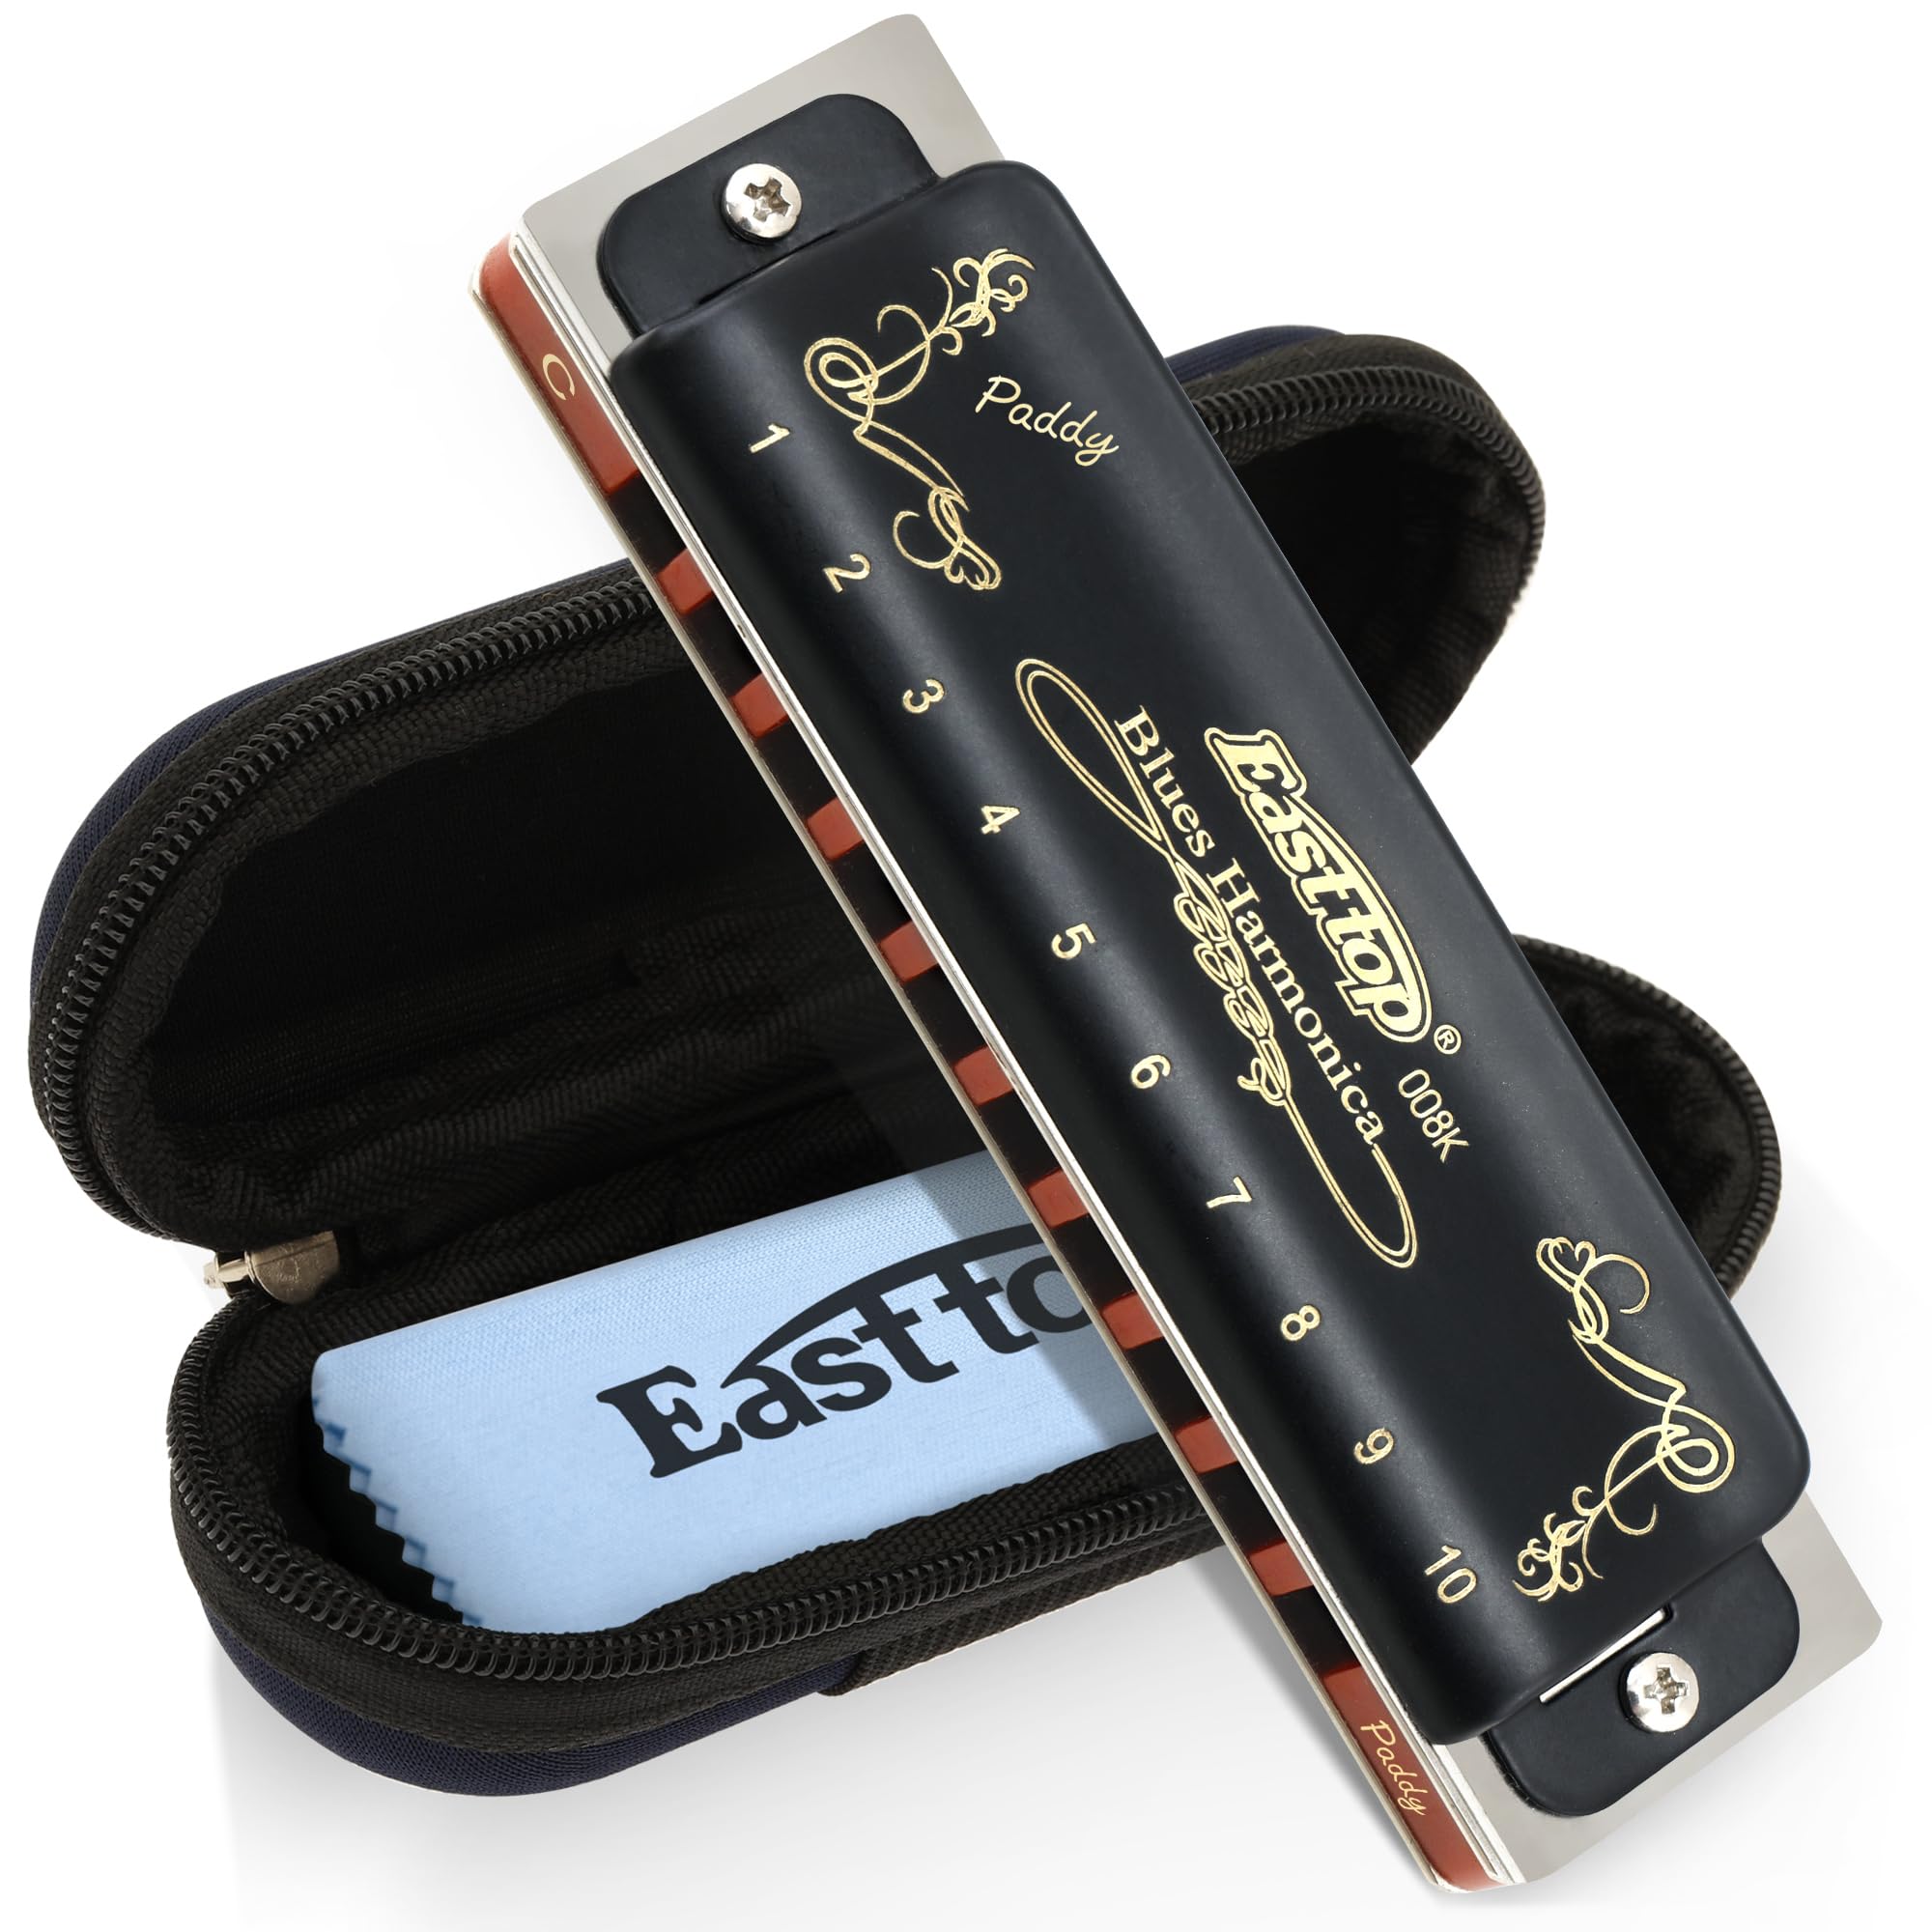 East top 10 Holes 20 Tones 008K Blues Professional Diatonic Blues Harmonica key of Paddy C, Harmonica for Adults, Professional Player and Students(T008K-Paddy) - Easttop harmonica